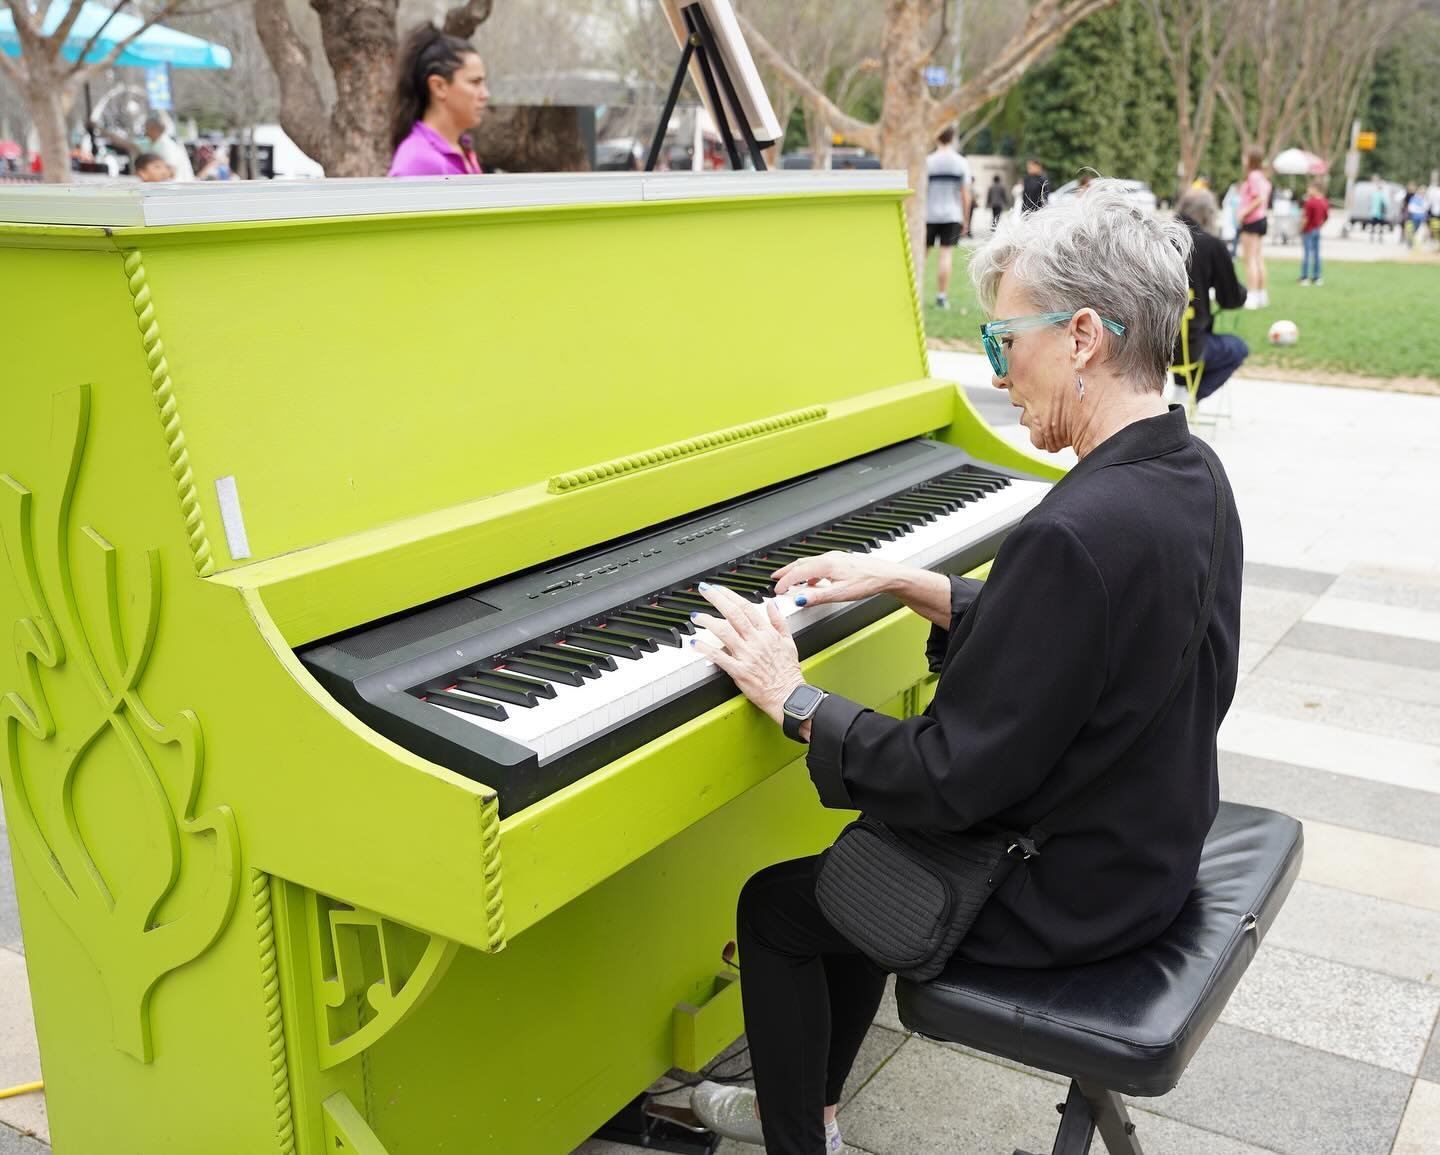 Piano in the Park
Today and Tomorrow 
11 AM - 2 PM 
FREE

Come tickle our ivories and make your piano teacher proud! Our famous green piano will be parked on Hart Boulevard this weekend, welcoming all takers on a first-come, first-served basis. 🎹🎼?